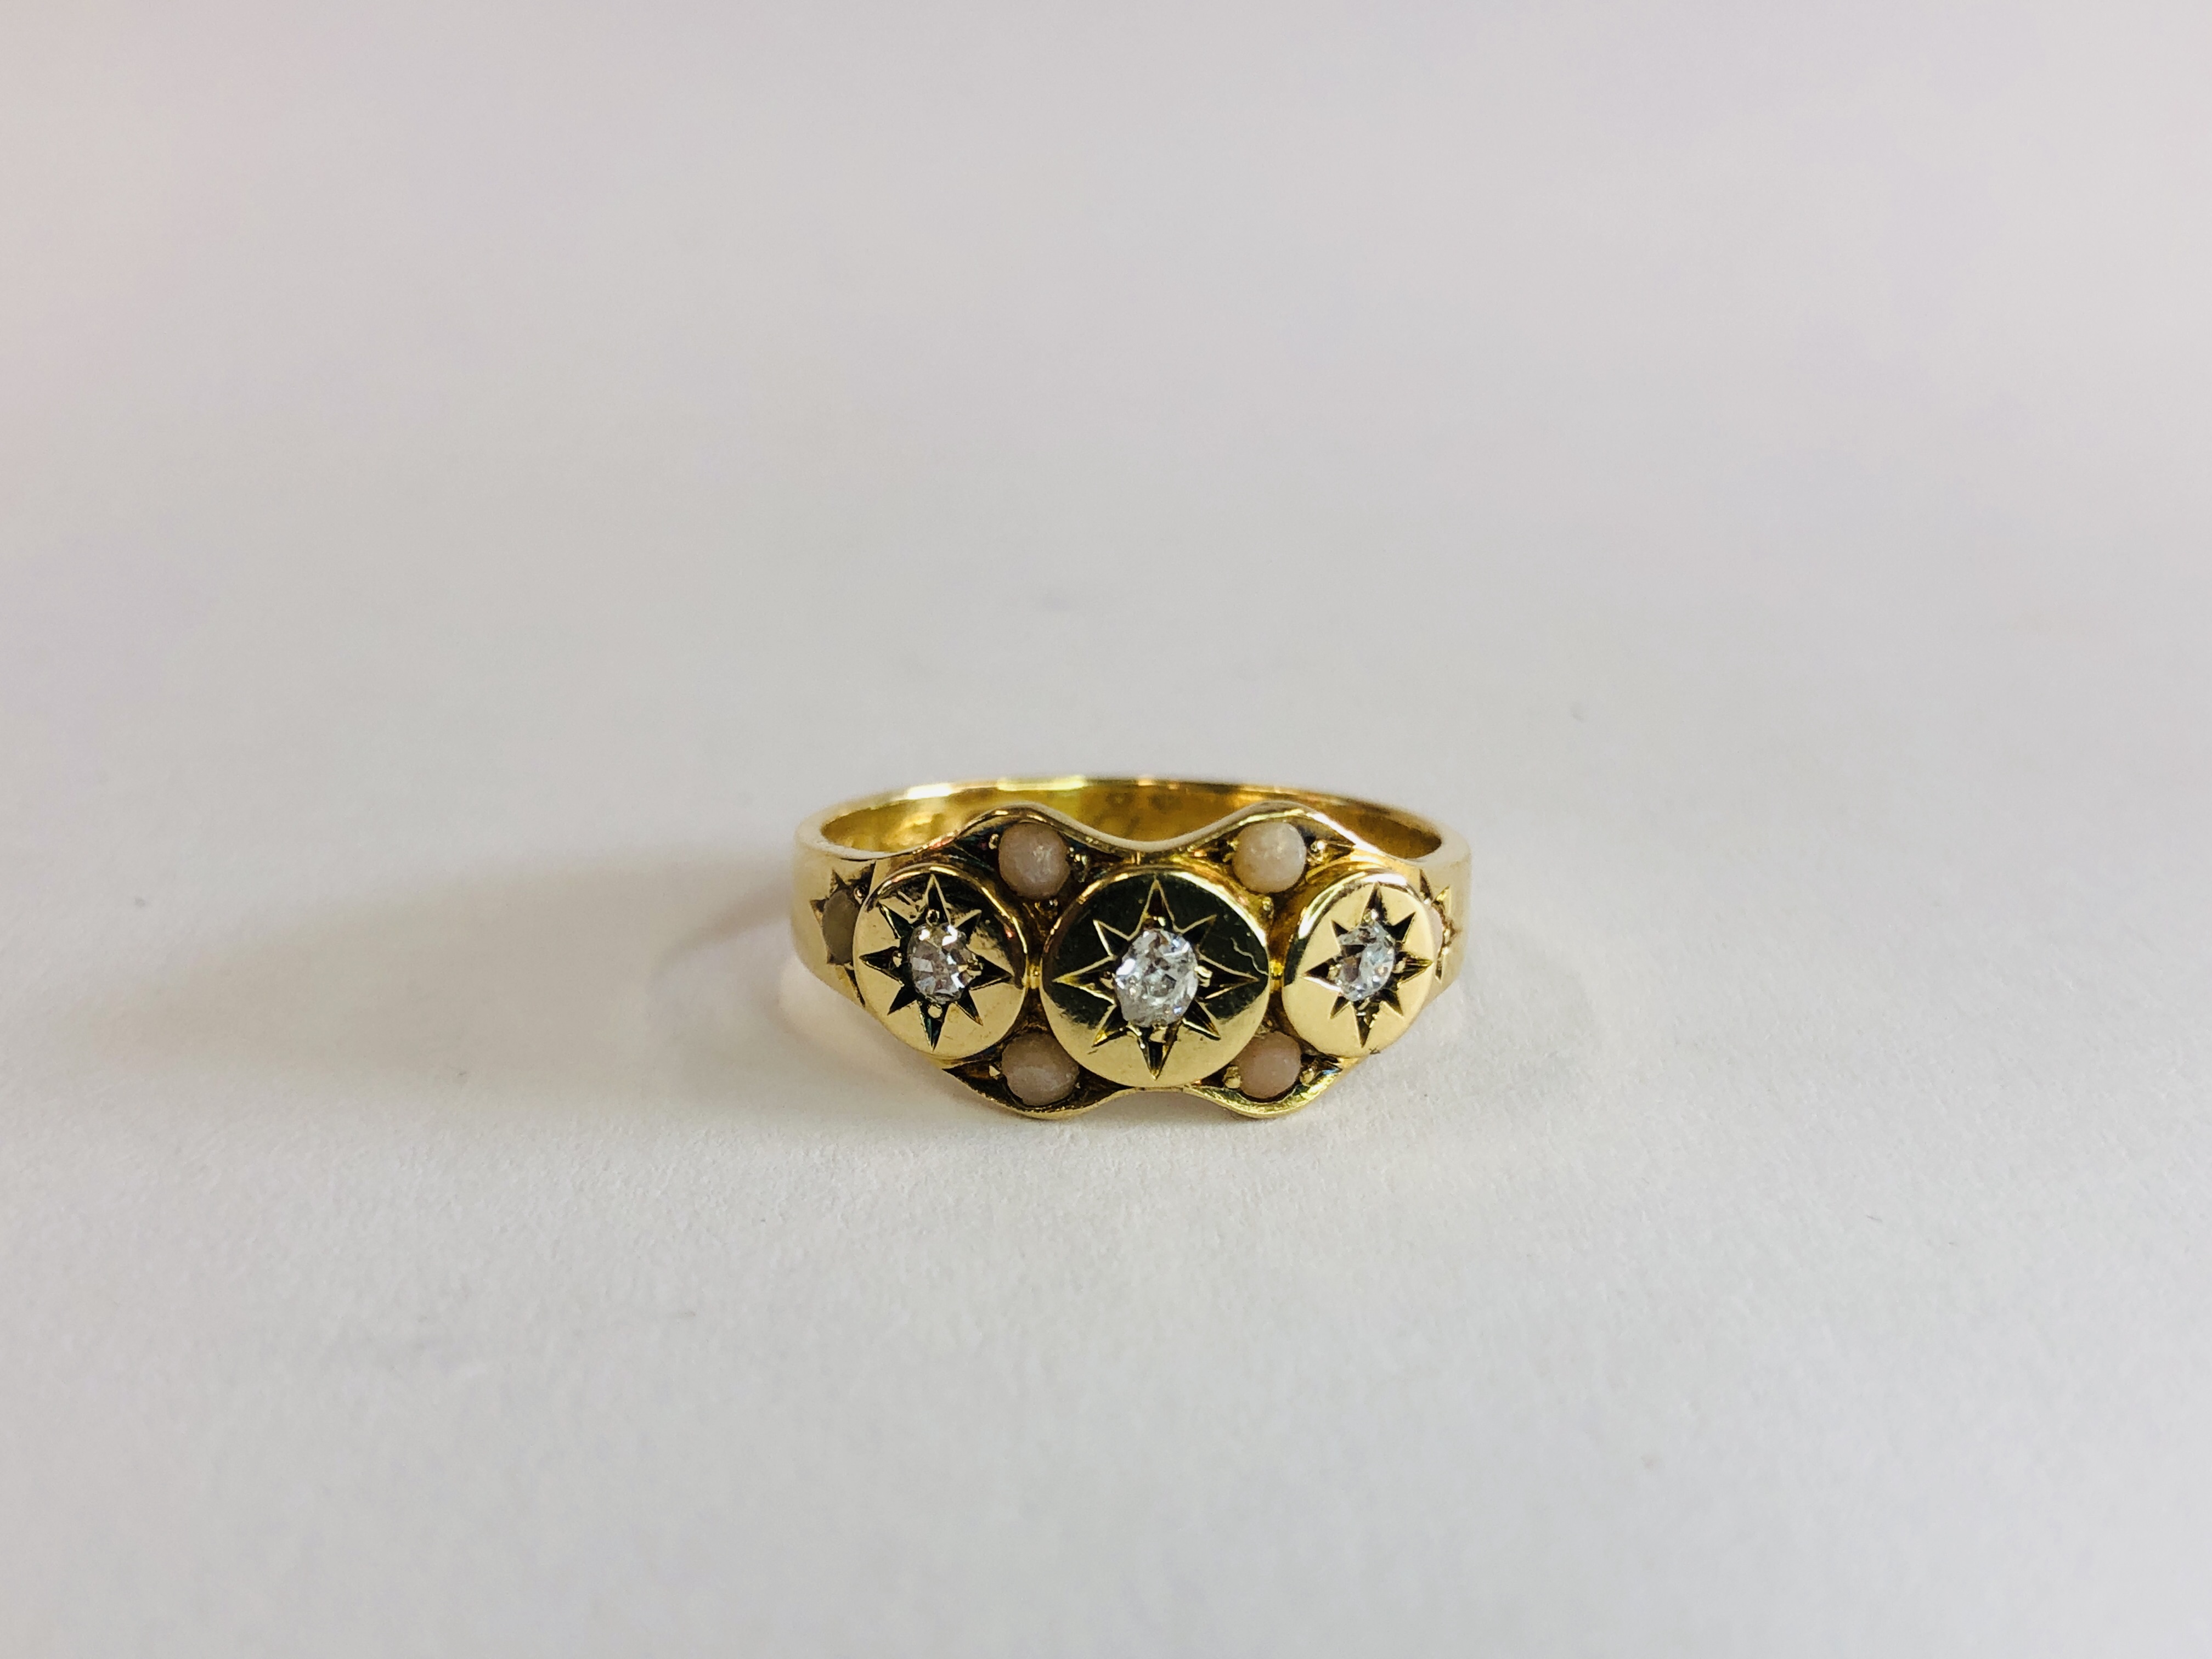 AN ANTIQUE 18CT GOLD DIAMOND AND CORAL RING, CHESTER 1883.